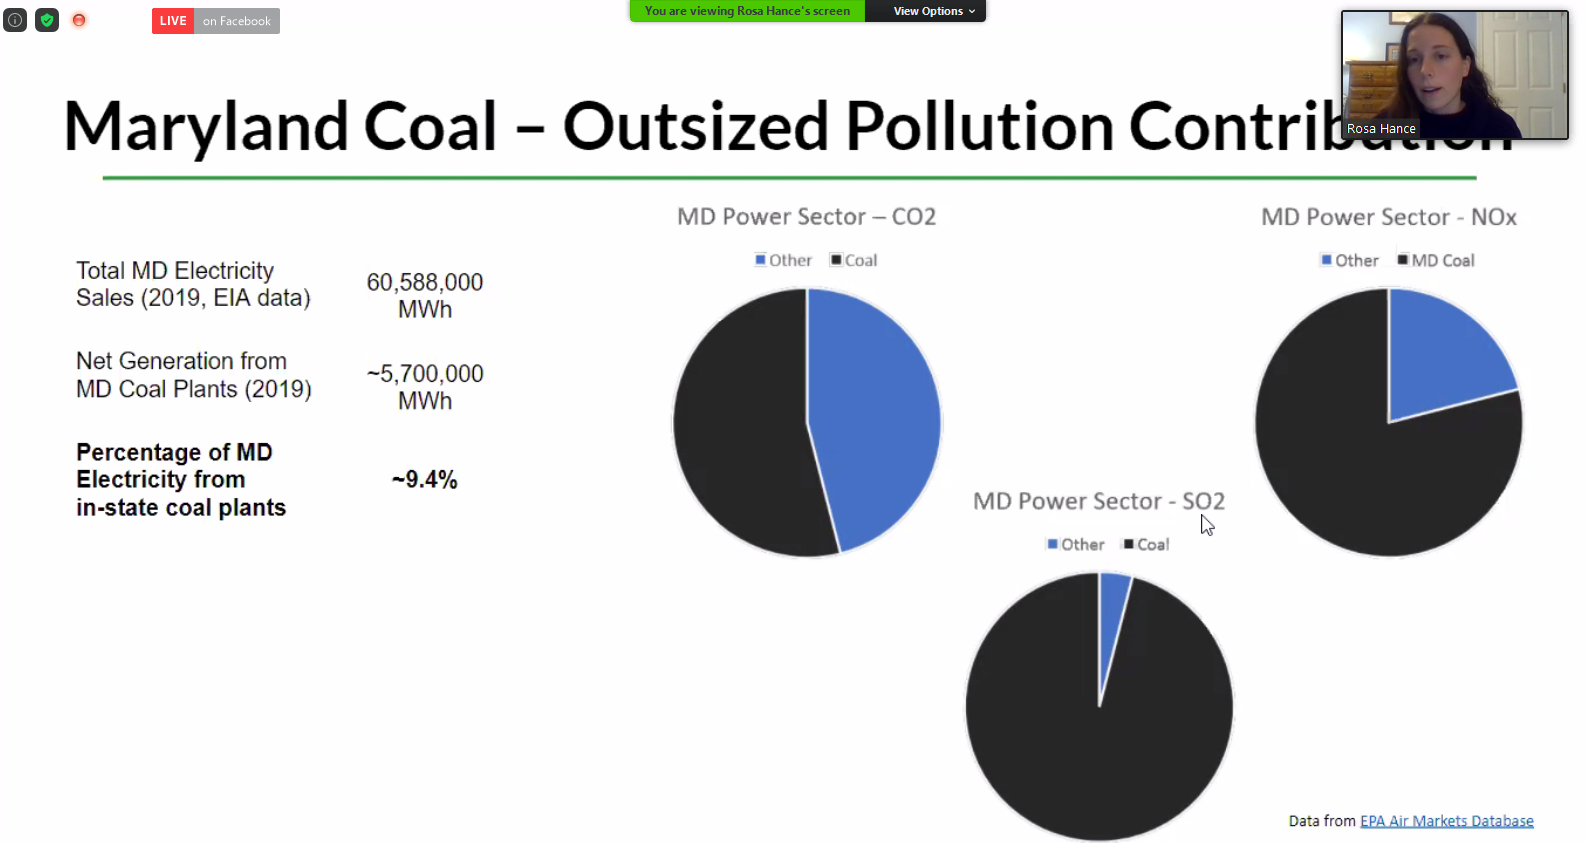 pie charts of coal pollution impacts in MD 2019